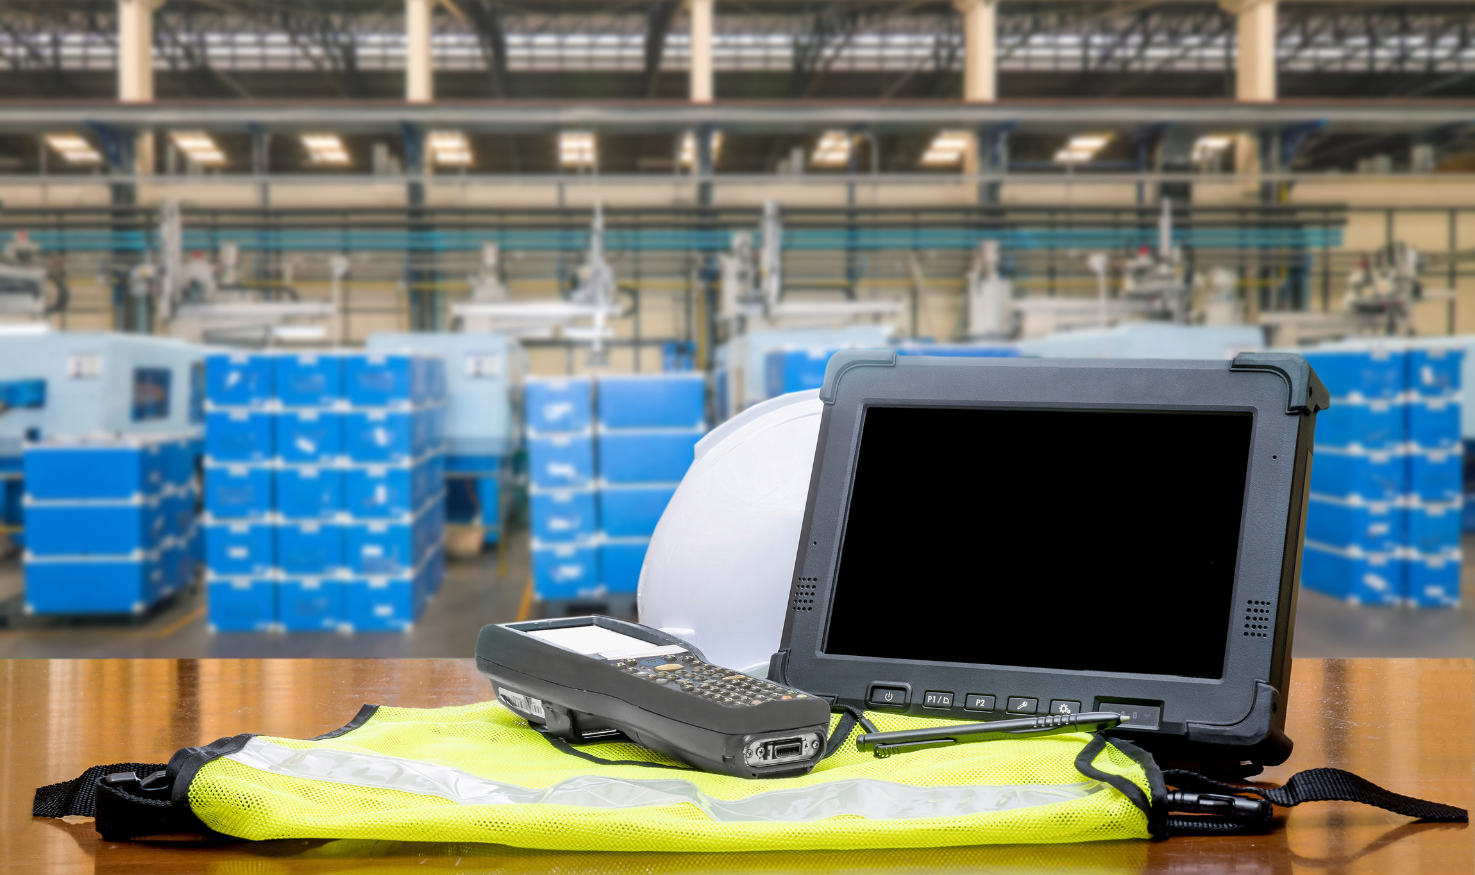 Rugged devices are popular among frontline workforce